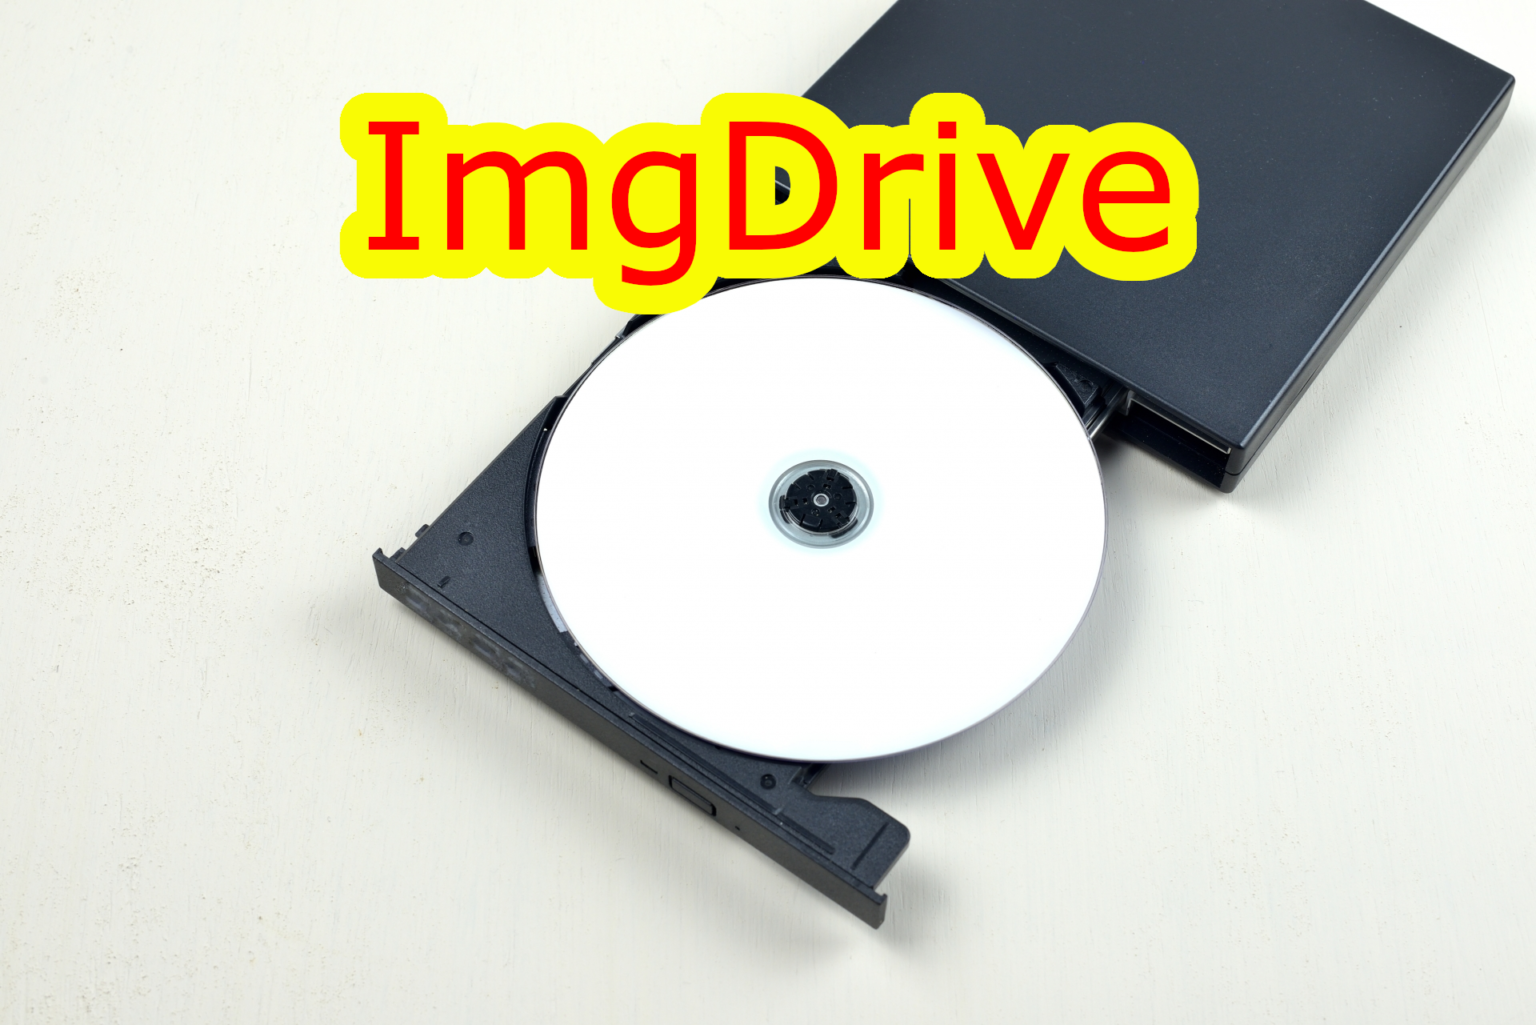 ImgDrive 2.1.2 for ipod download